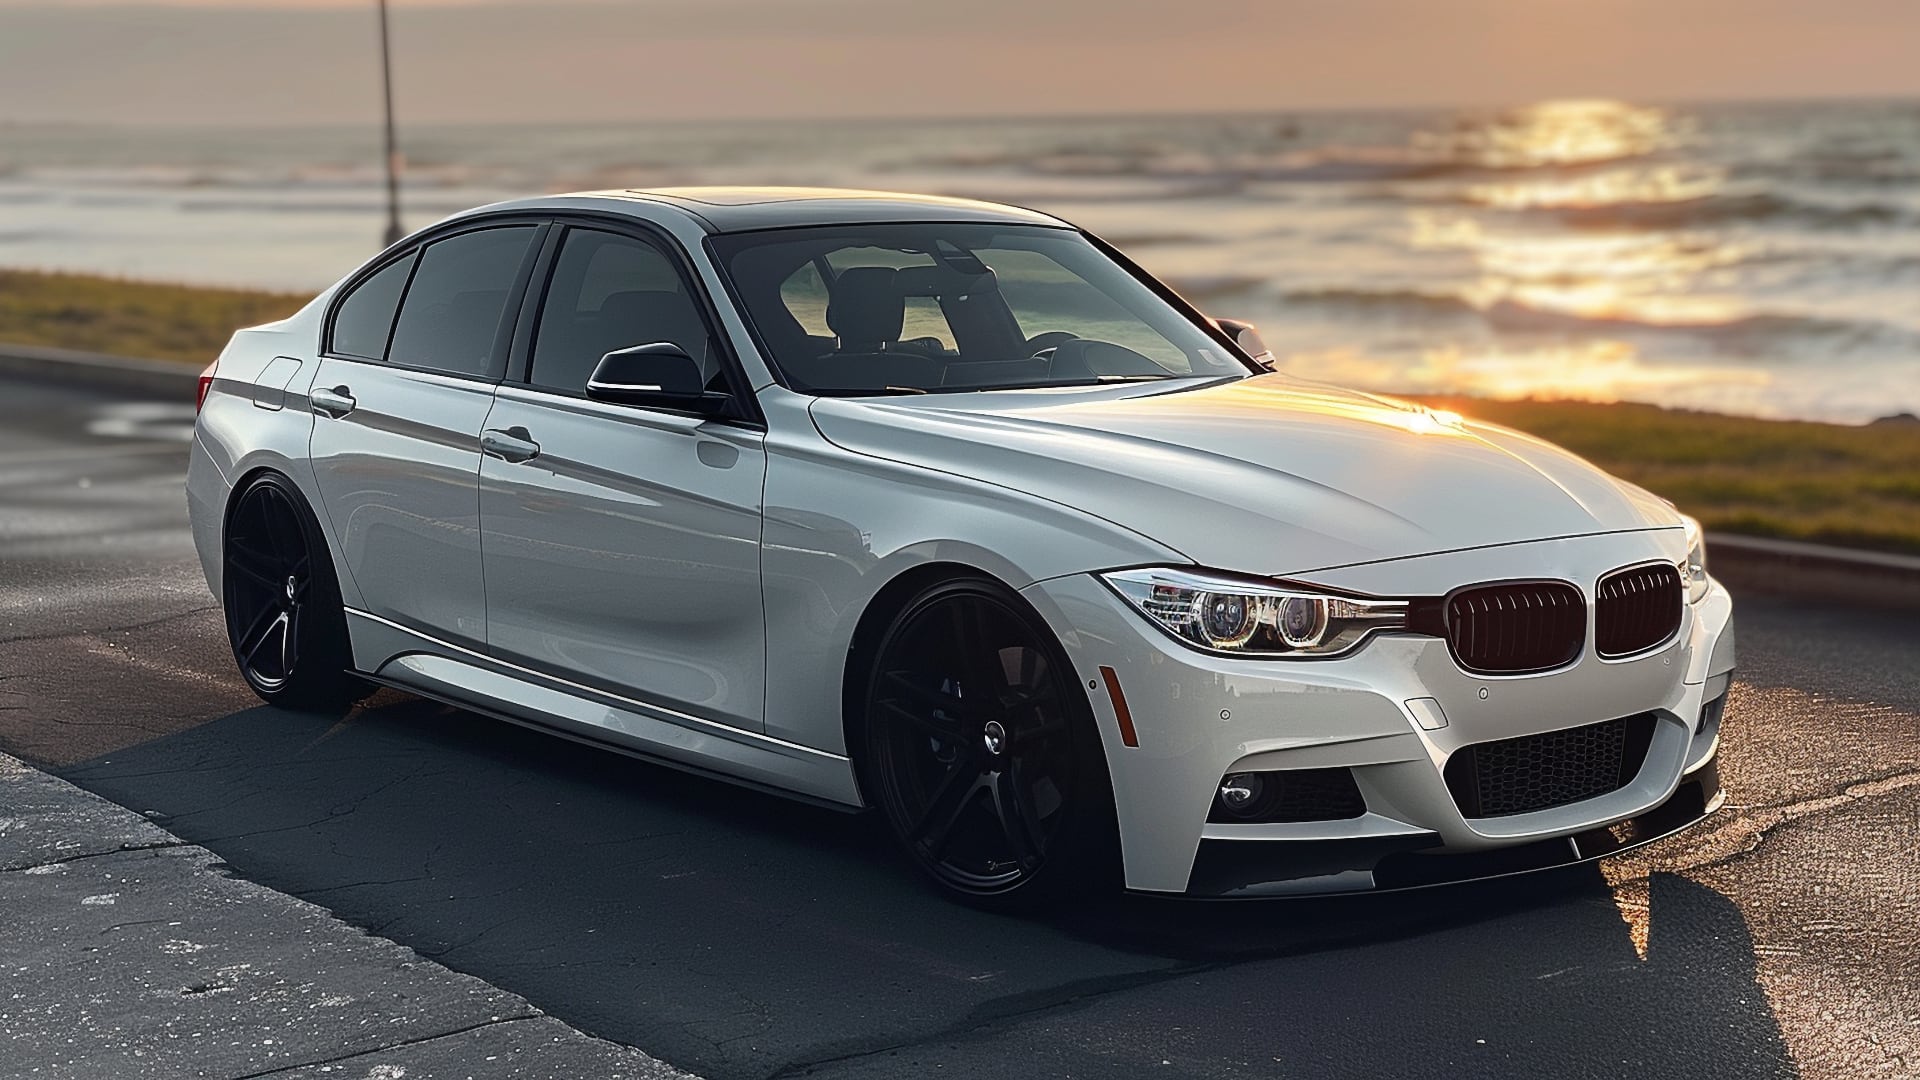 A white BMW 335i parked in front of the ocean.